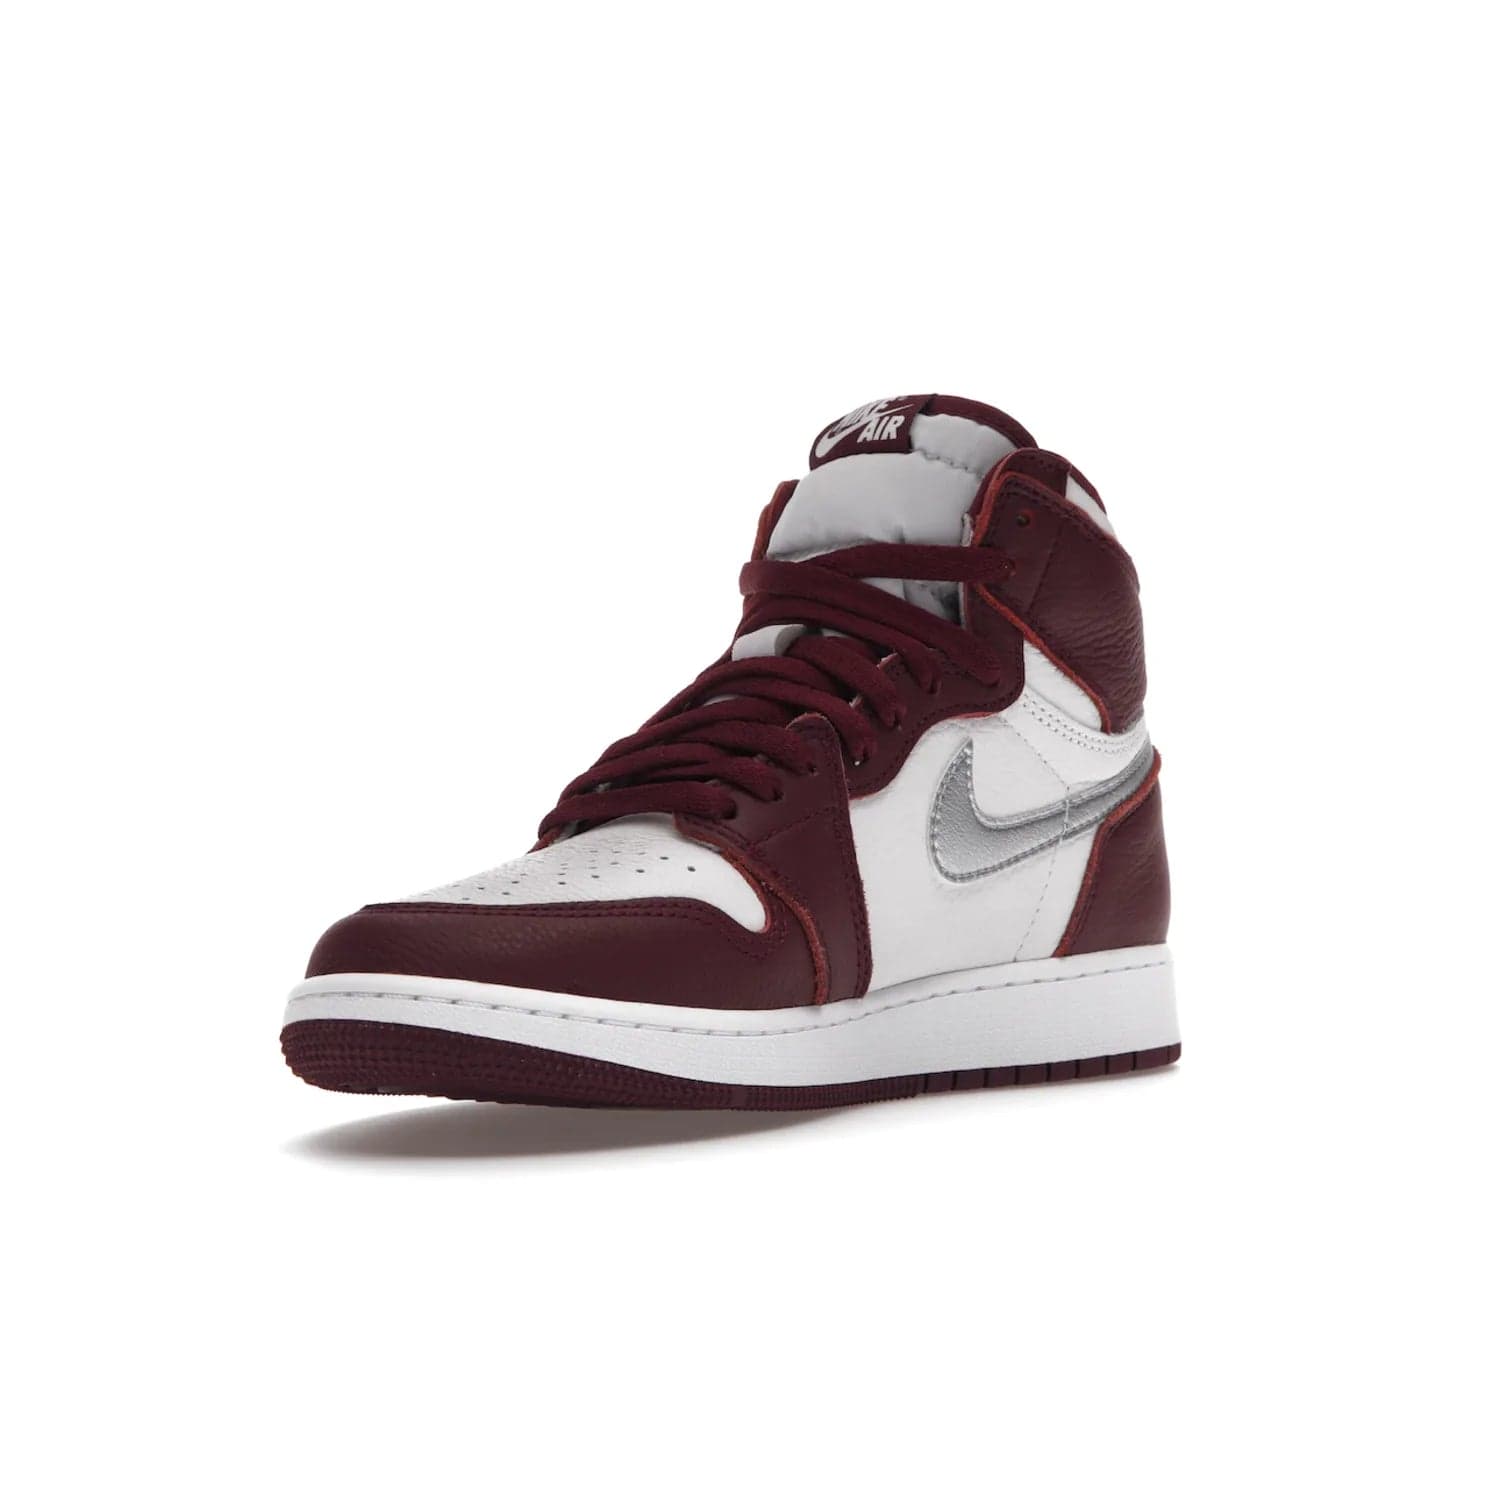 Jordan 1 Retro High OG Bordeaux (GS) - Image 14 - Only at www.BallersClubKickz.com - #
Introducing the Air Jordan 1 Retro High OG Bordeaux GS – a signature colorway part of the Jordan Brand Fall 2021 lineup. White leather upper & Bordeaux overlays, metallic silver swoosh, jeweled Air Jordan Wings logo & more. Step up your style game with this sleek fall season silhouette.